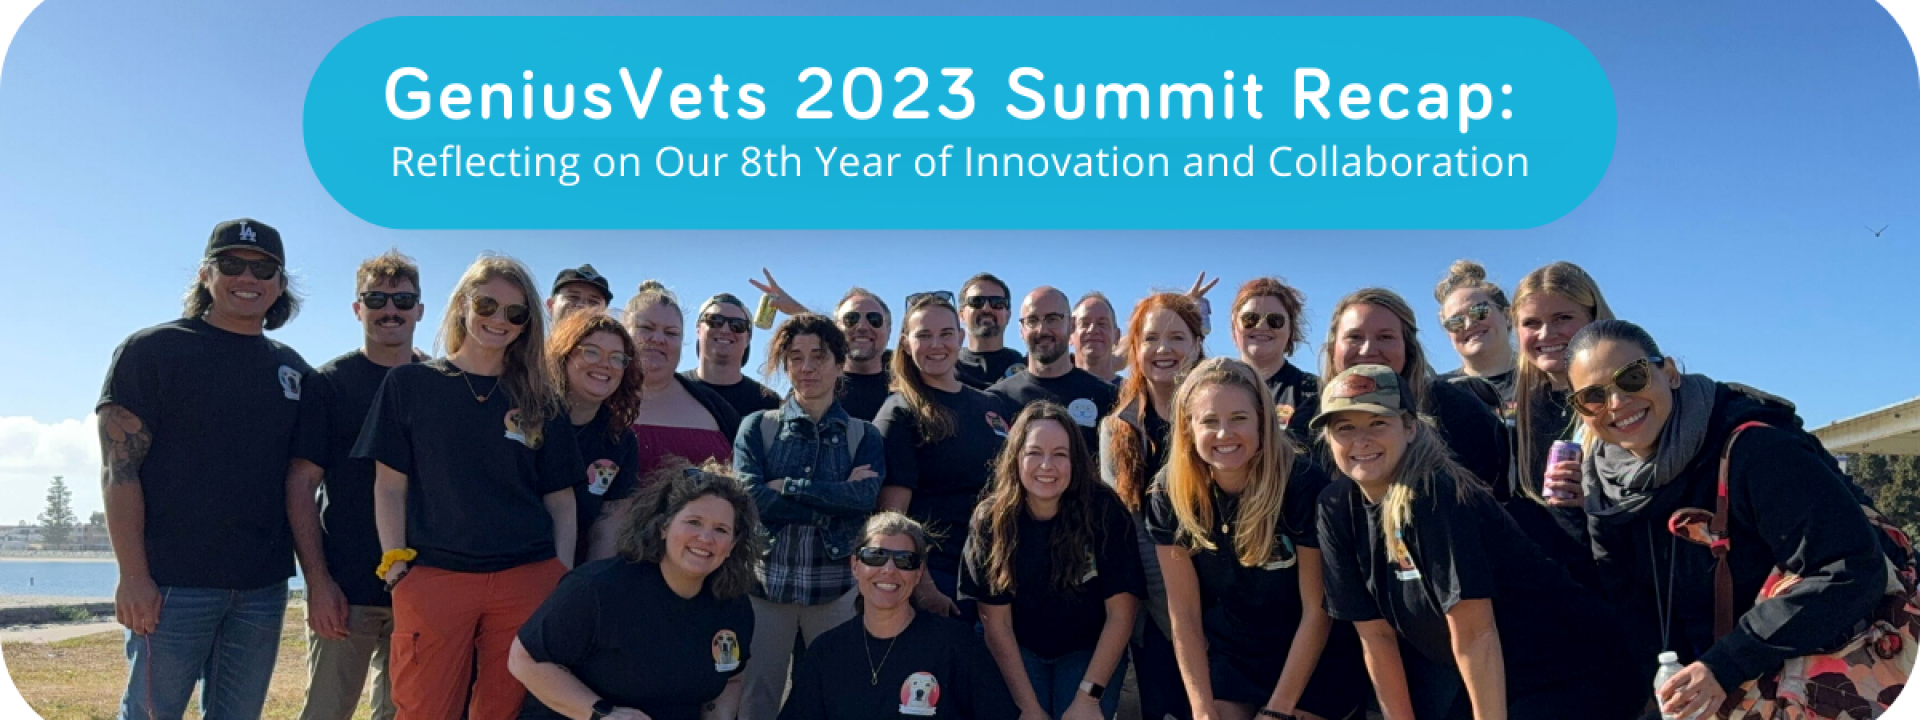 GeniusVets 2023 Summit Recap: Reflecting on Our 8th Year of Innovation and Collaboration